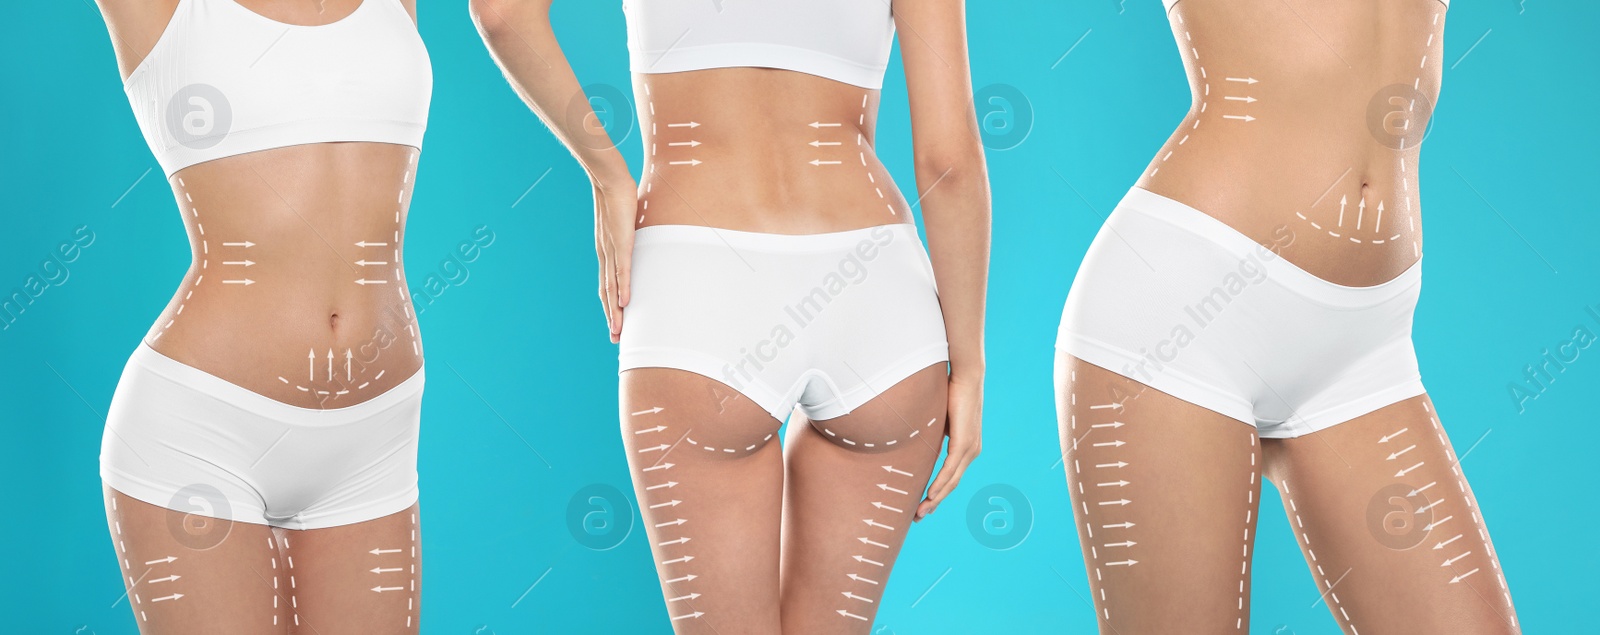 Image of Photos of young woman with marks on body against blue background, collage. Cosmetic surgery concept